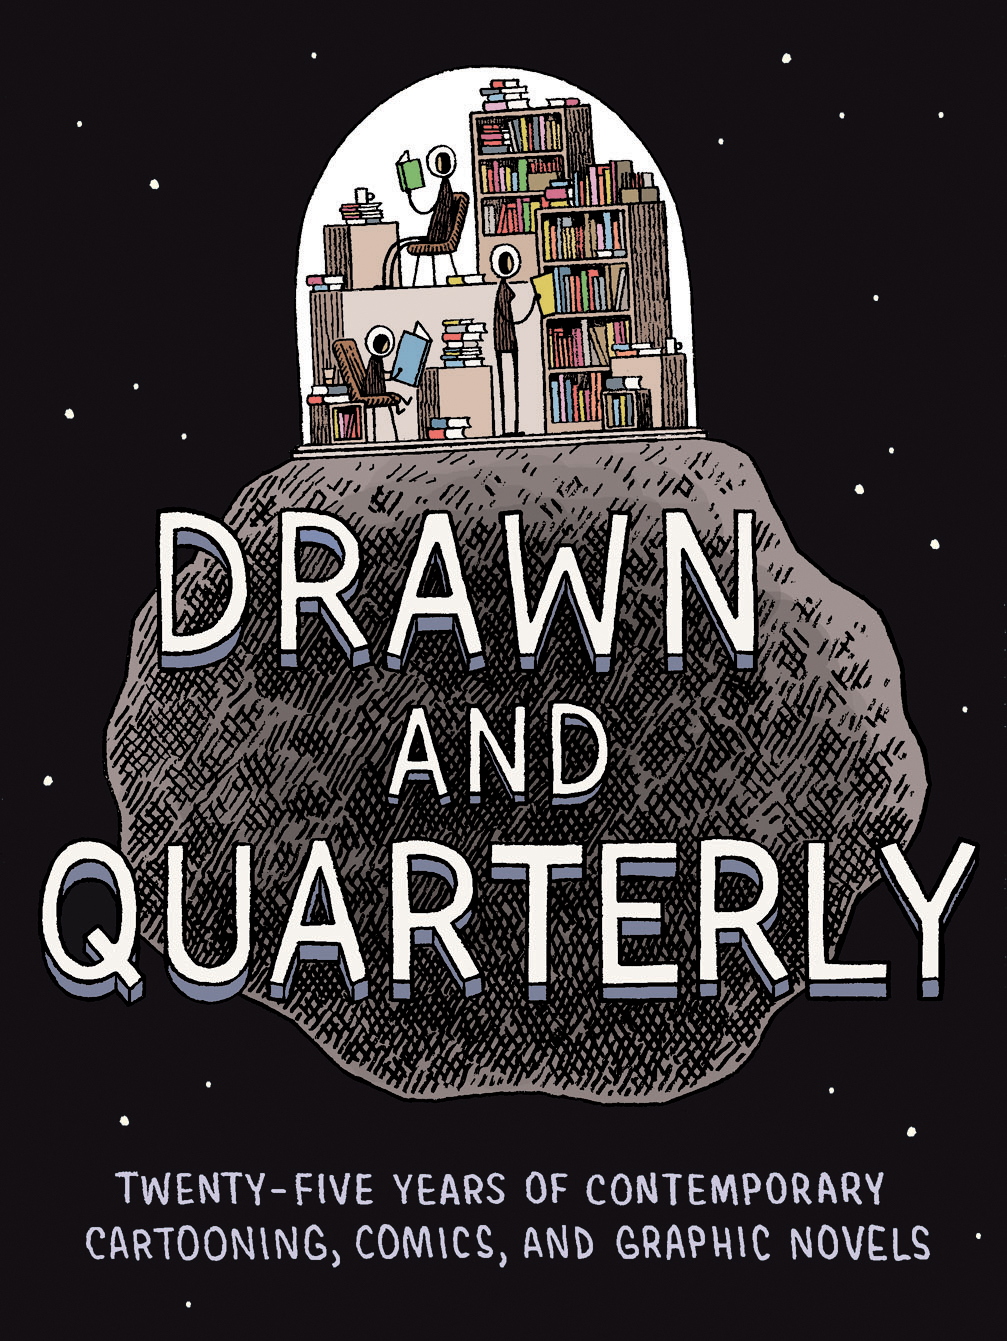 DQ25 tomgauld OH BOY! New Tamaki, Nilsen, Delisle, Seth and more coming next year from Drawn & Quarterly